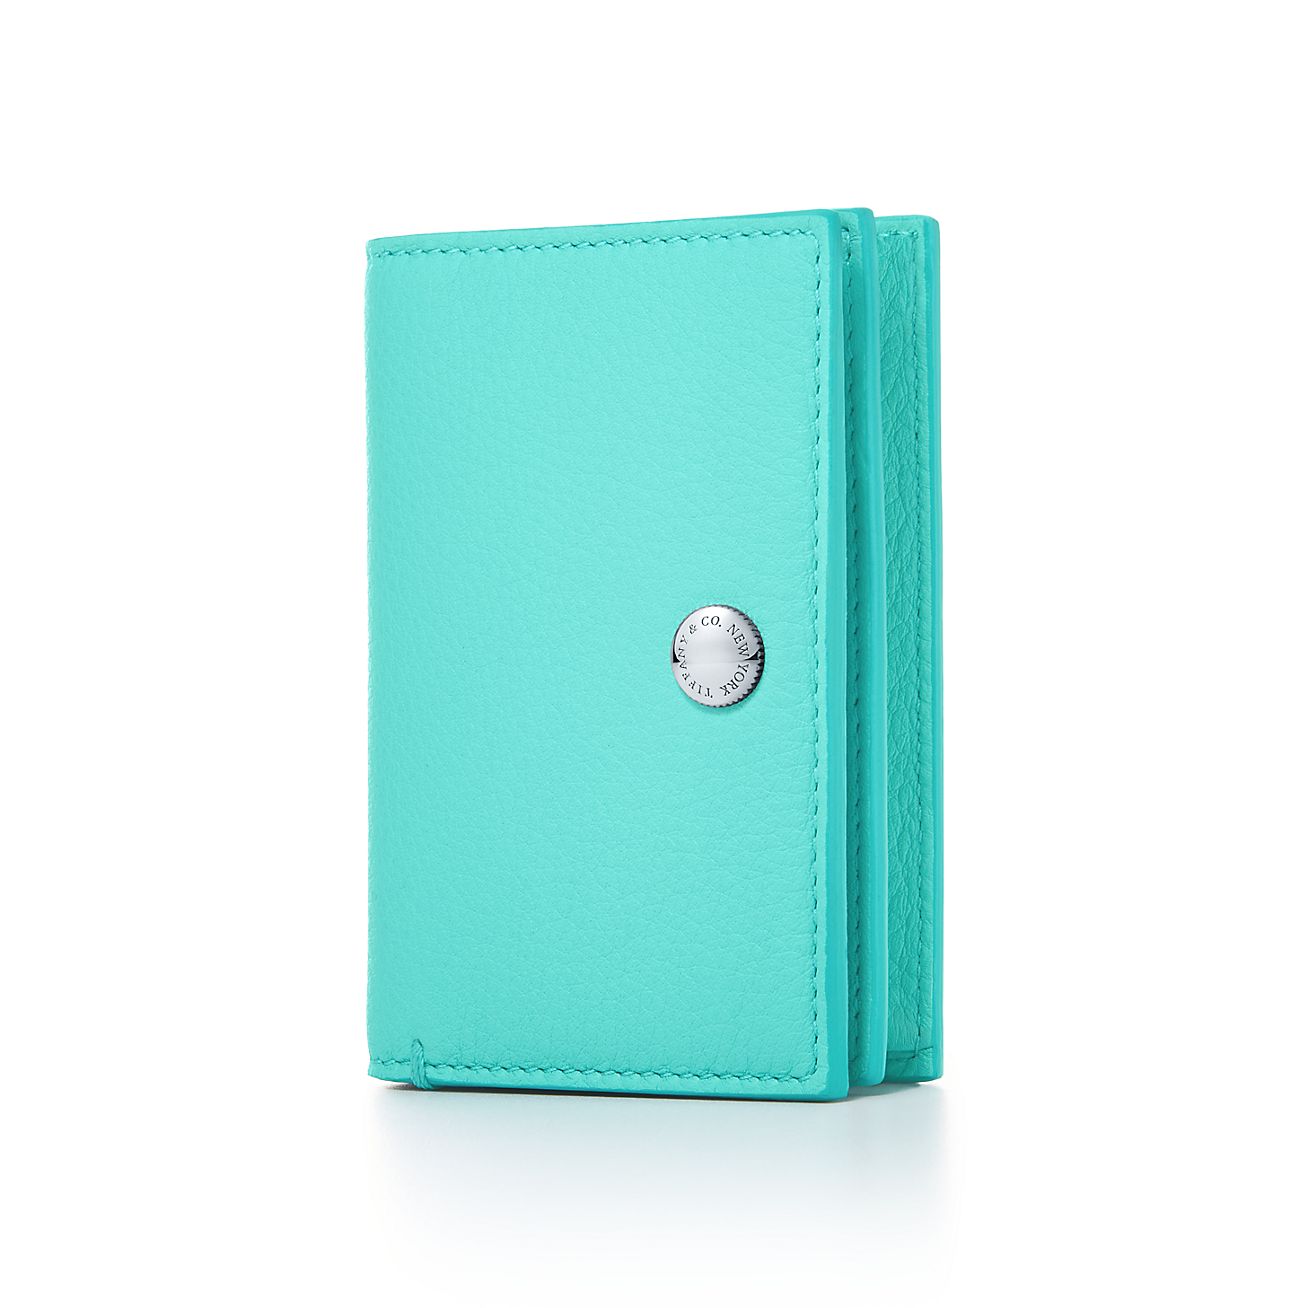 tiffany business card holder leather